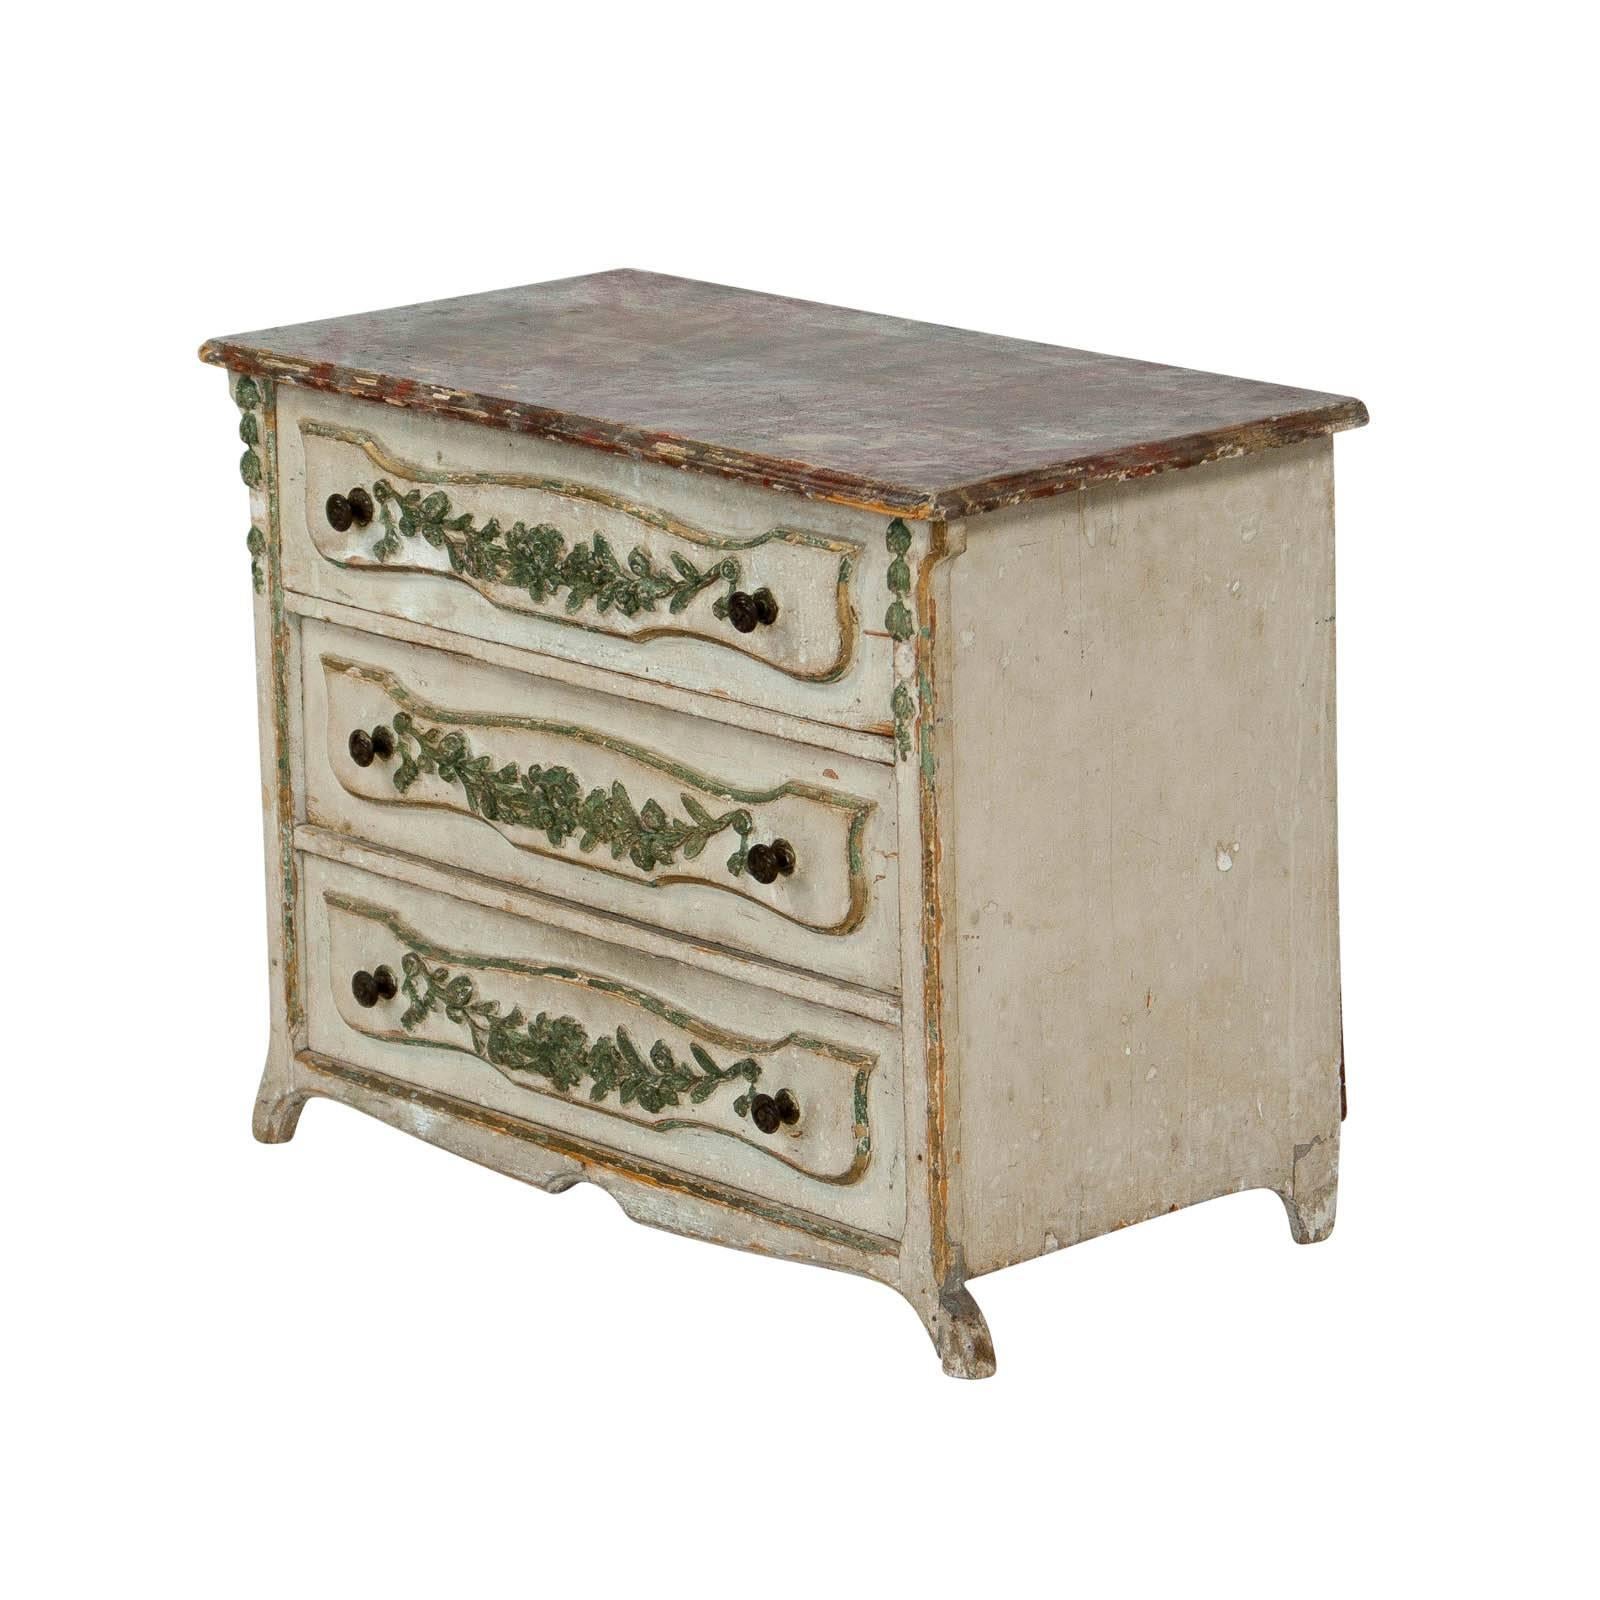 An Italian painted miniature chest or commode in the 18th century style of a piece made in the North near Piedmont. Great rare decorative piece from a very good collection. Nice old painted surface with well carved details. Possibly earlier.